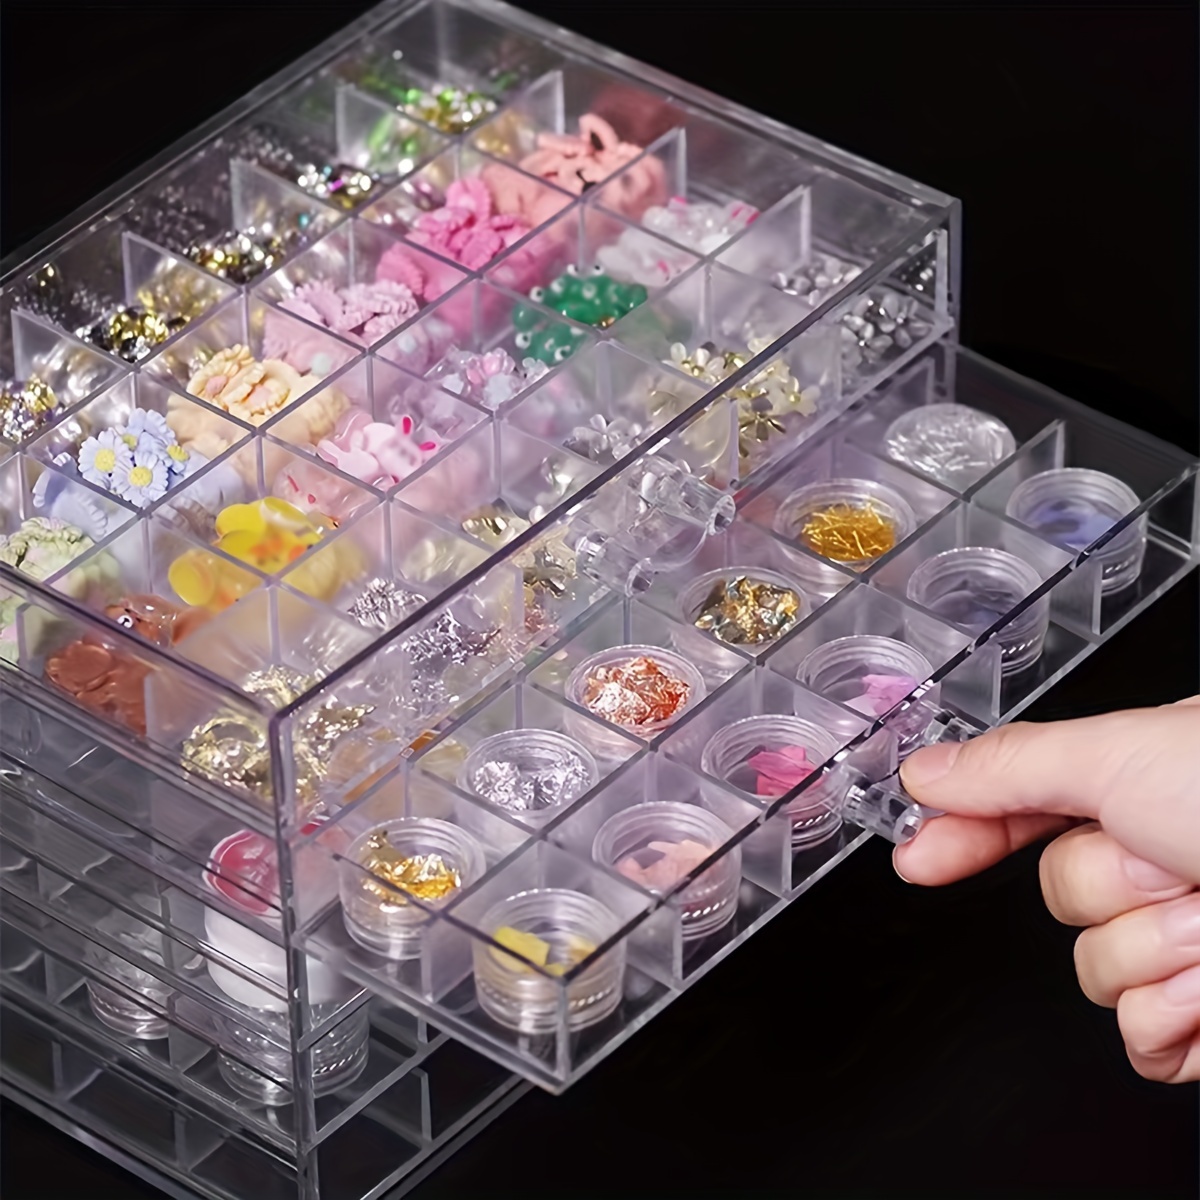 

Large 5-tier Transparent Jewelry Organizer With 120 Compartments - Detachable Drawer Design For Nail Art, Earrings, Bracelets, Necklaces & Rings - Durable Ps Material